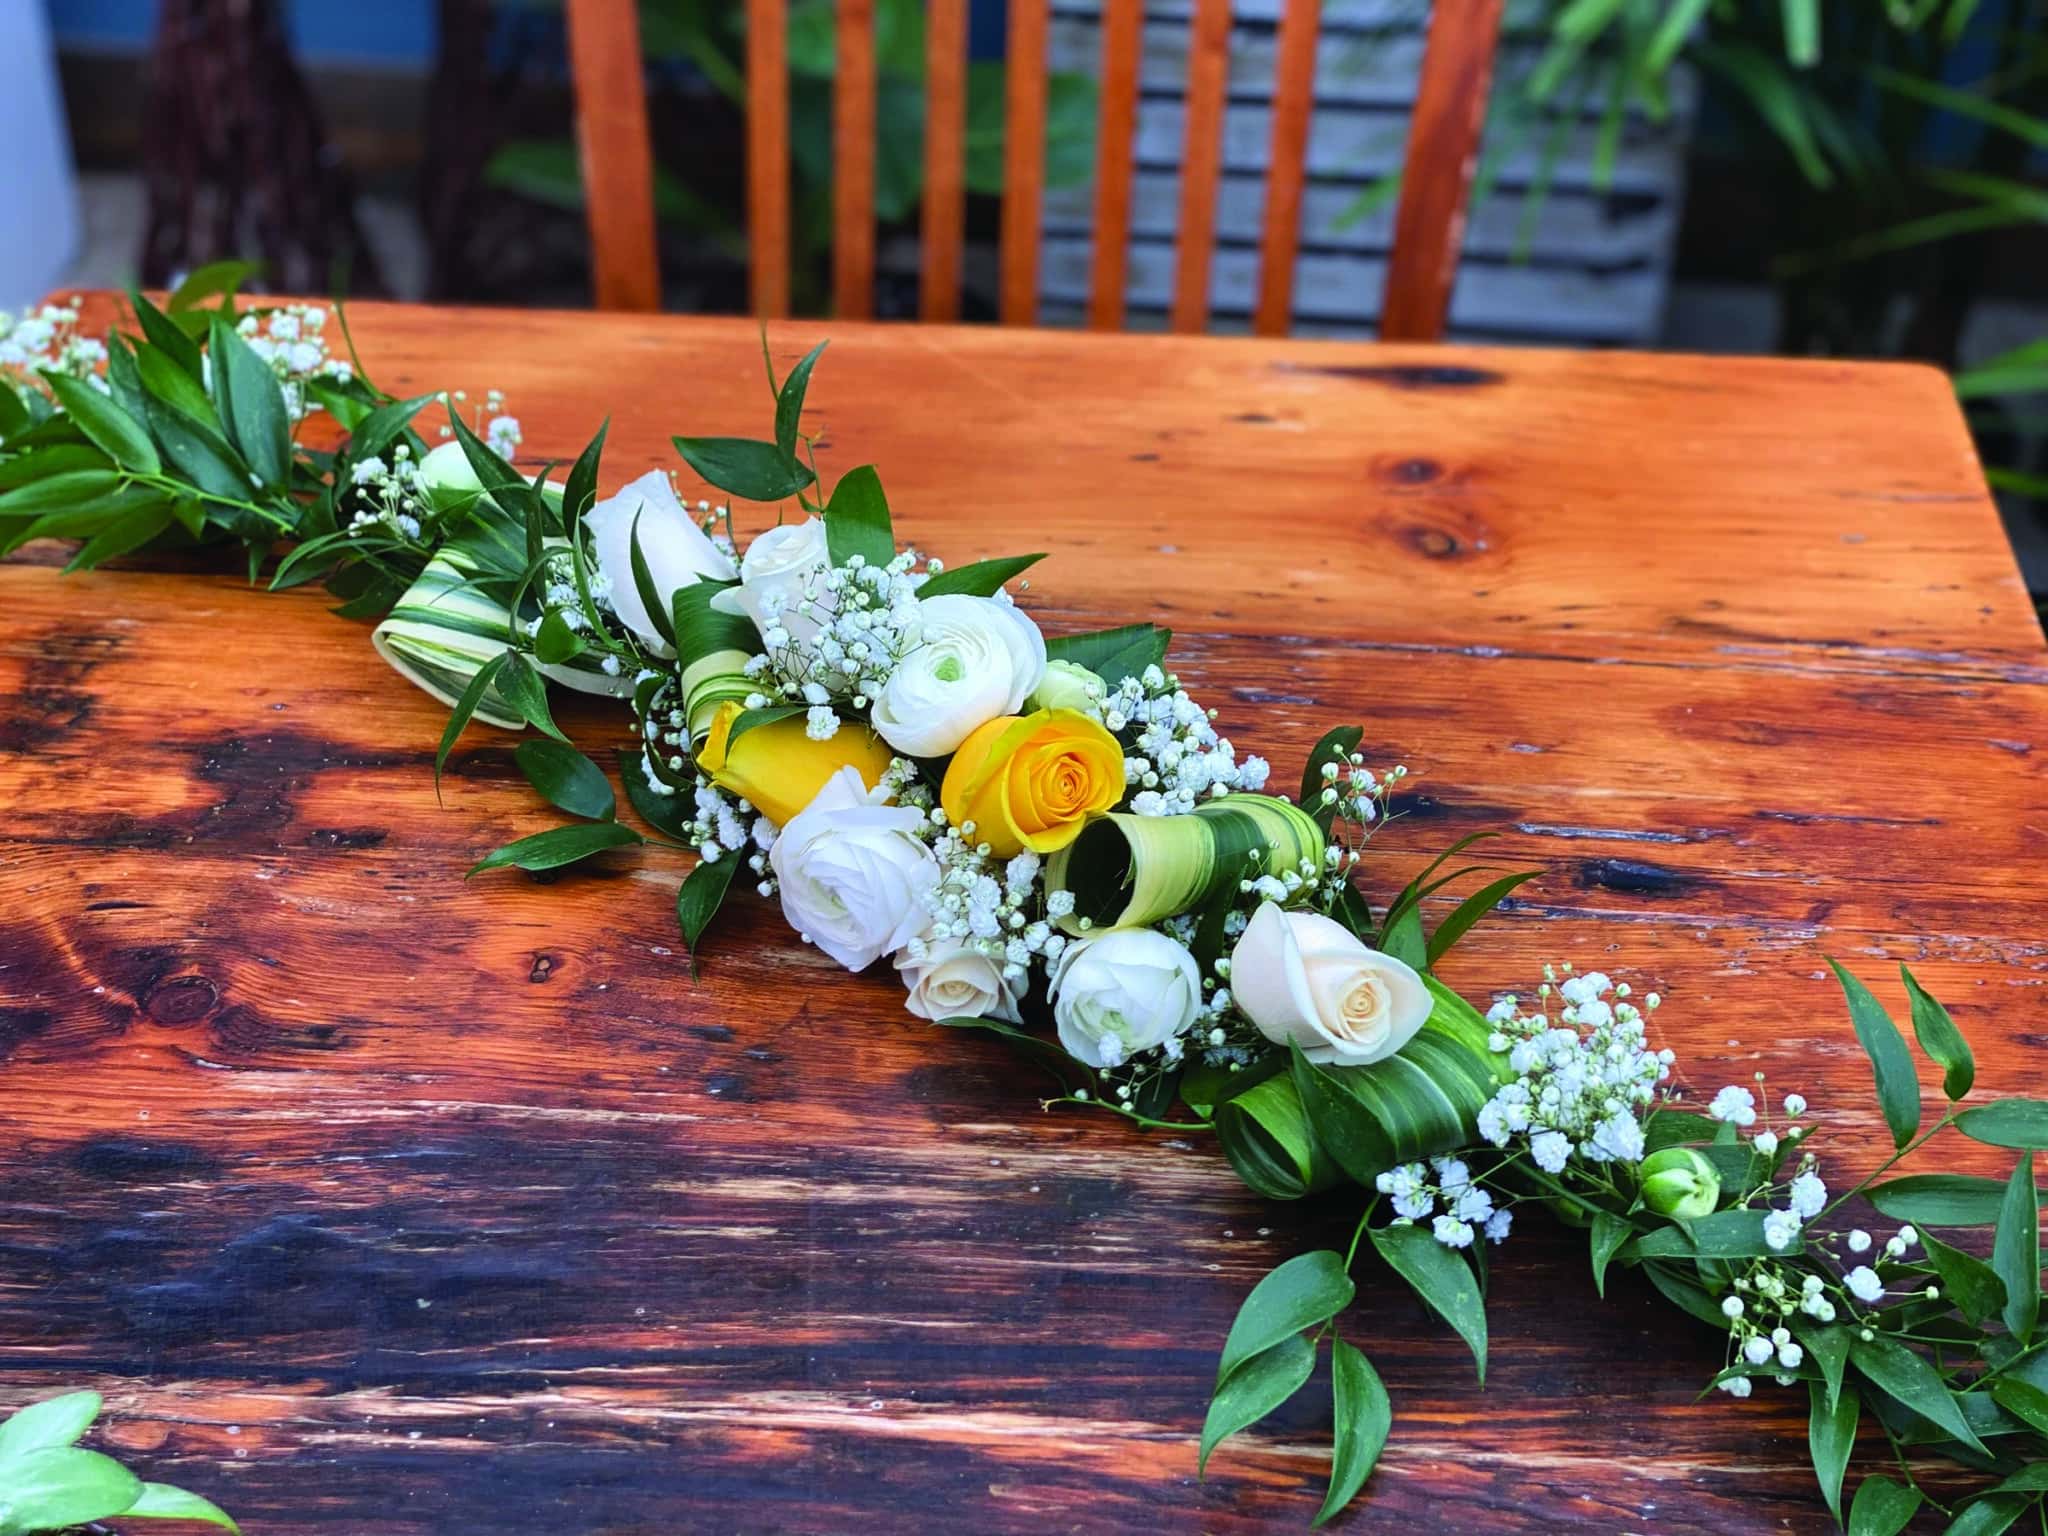 The Watering Can | A garland of white roses, yellow roses, white rununculus, baby's breath, aspidestra, and ruscus.